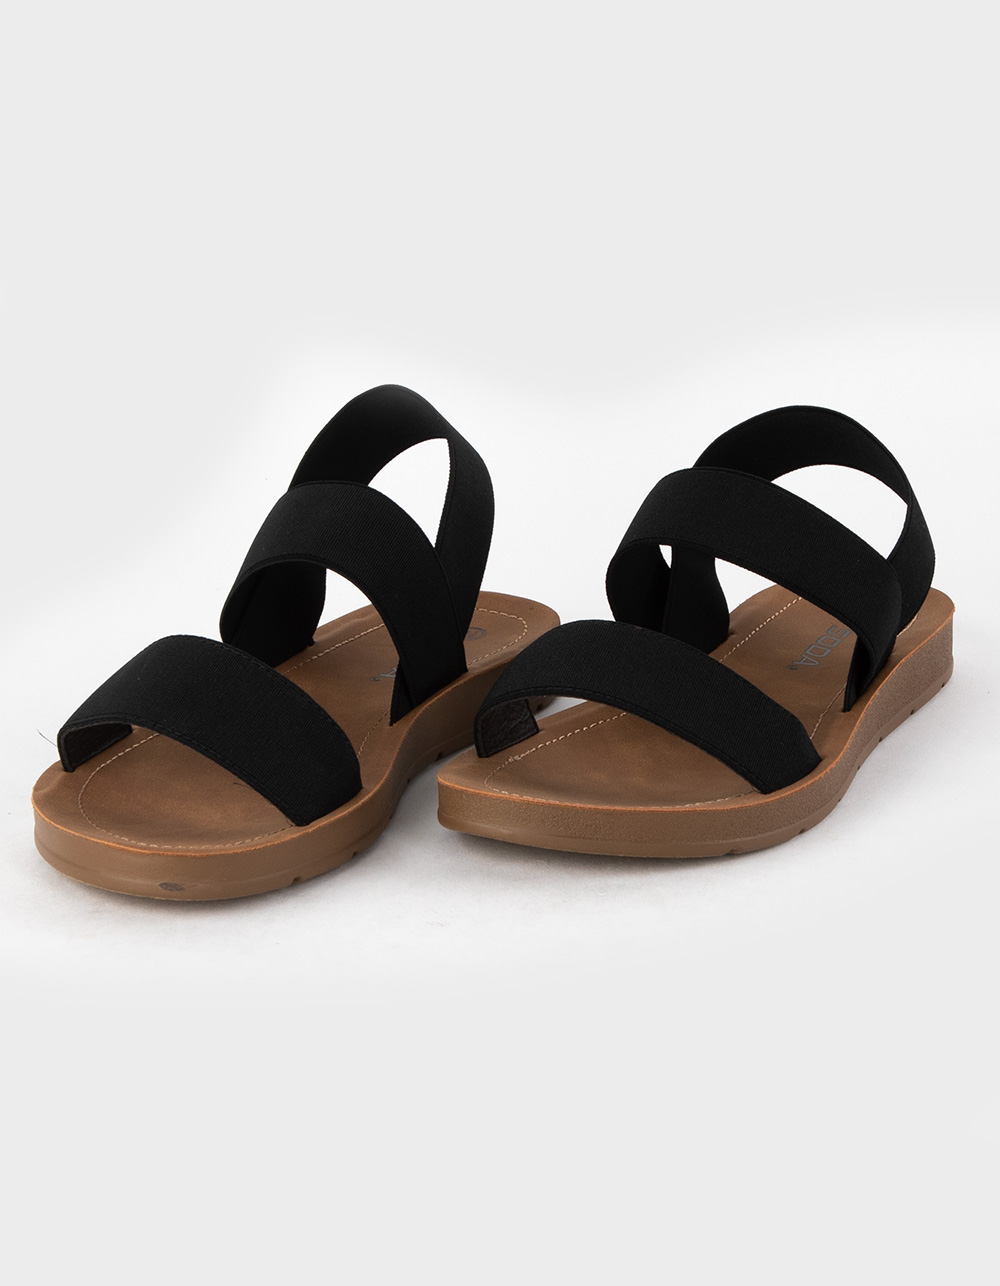 SODA Shoes, Sandals, & Boots | Tillys